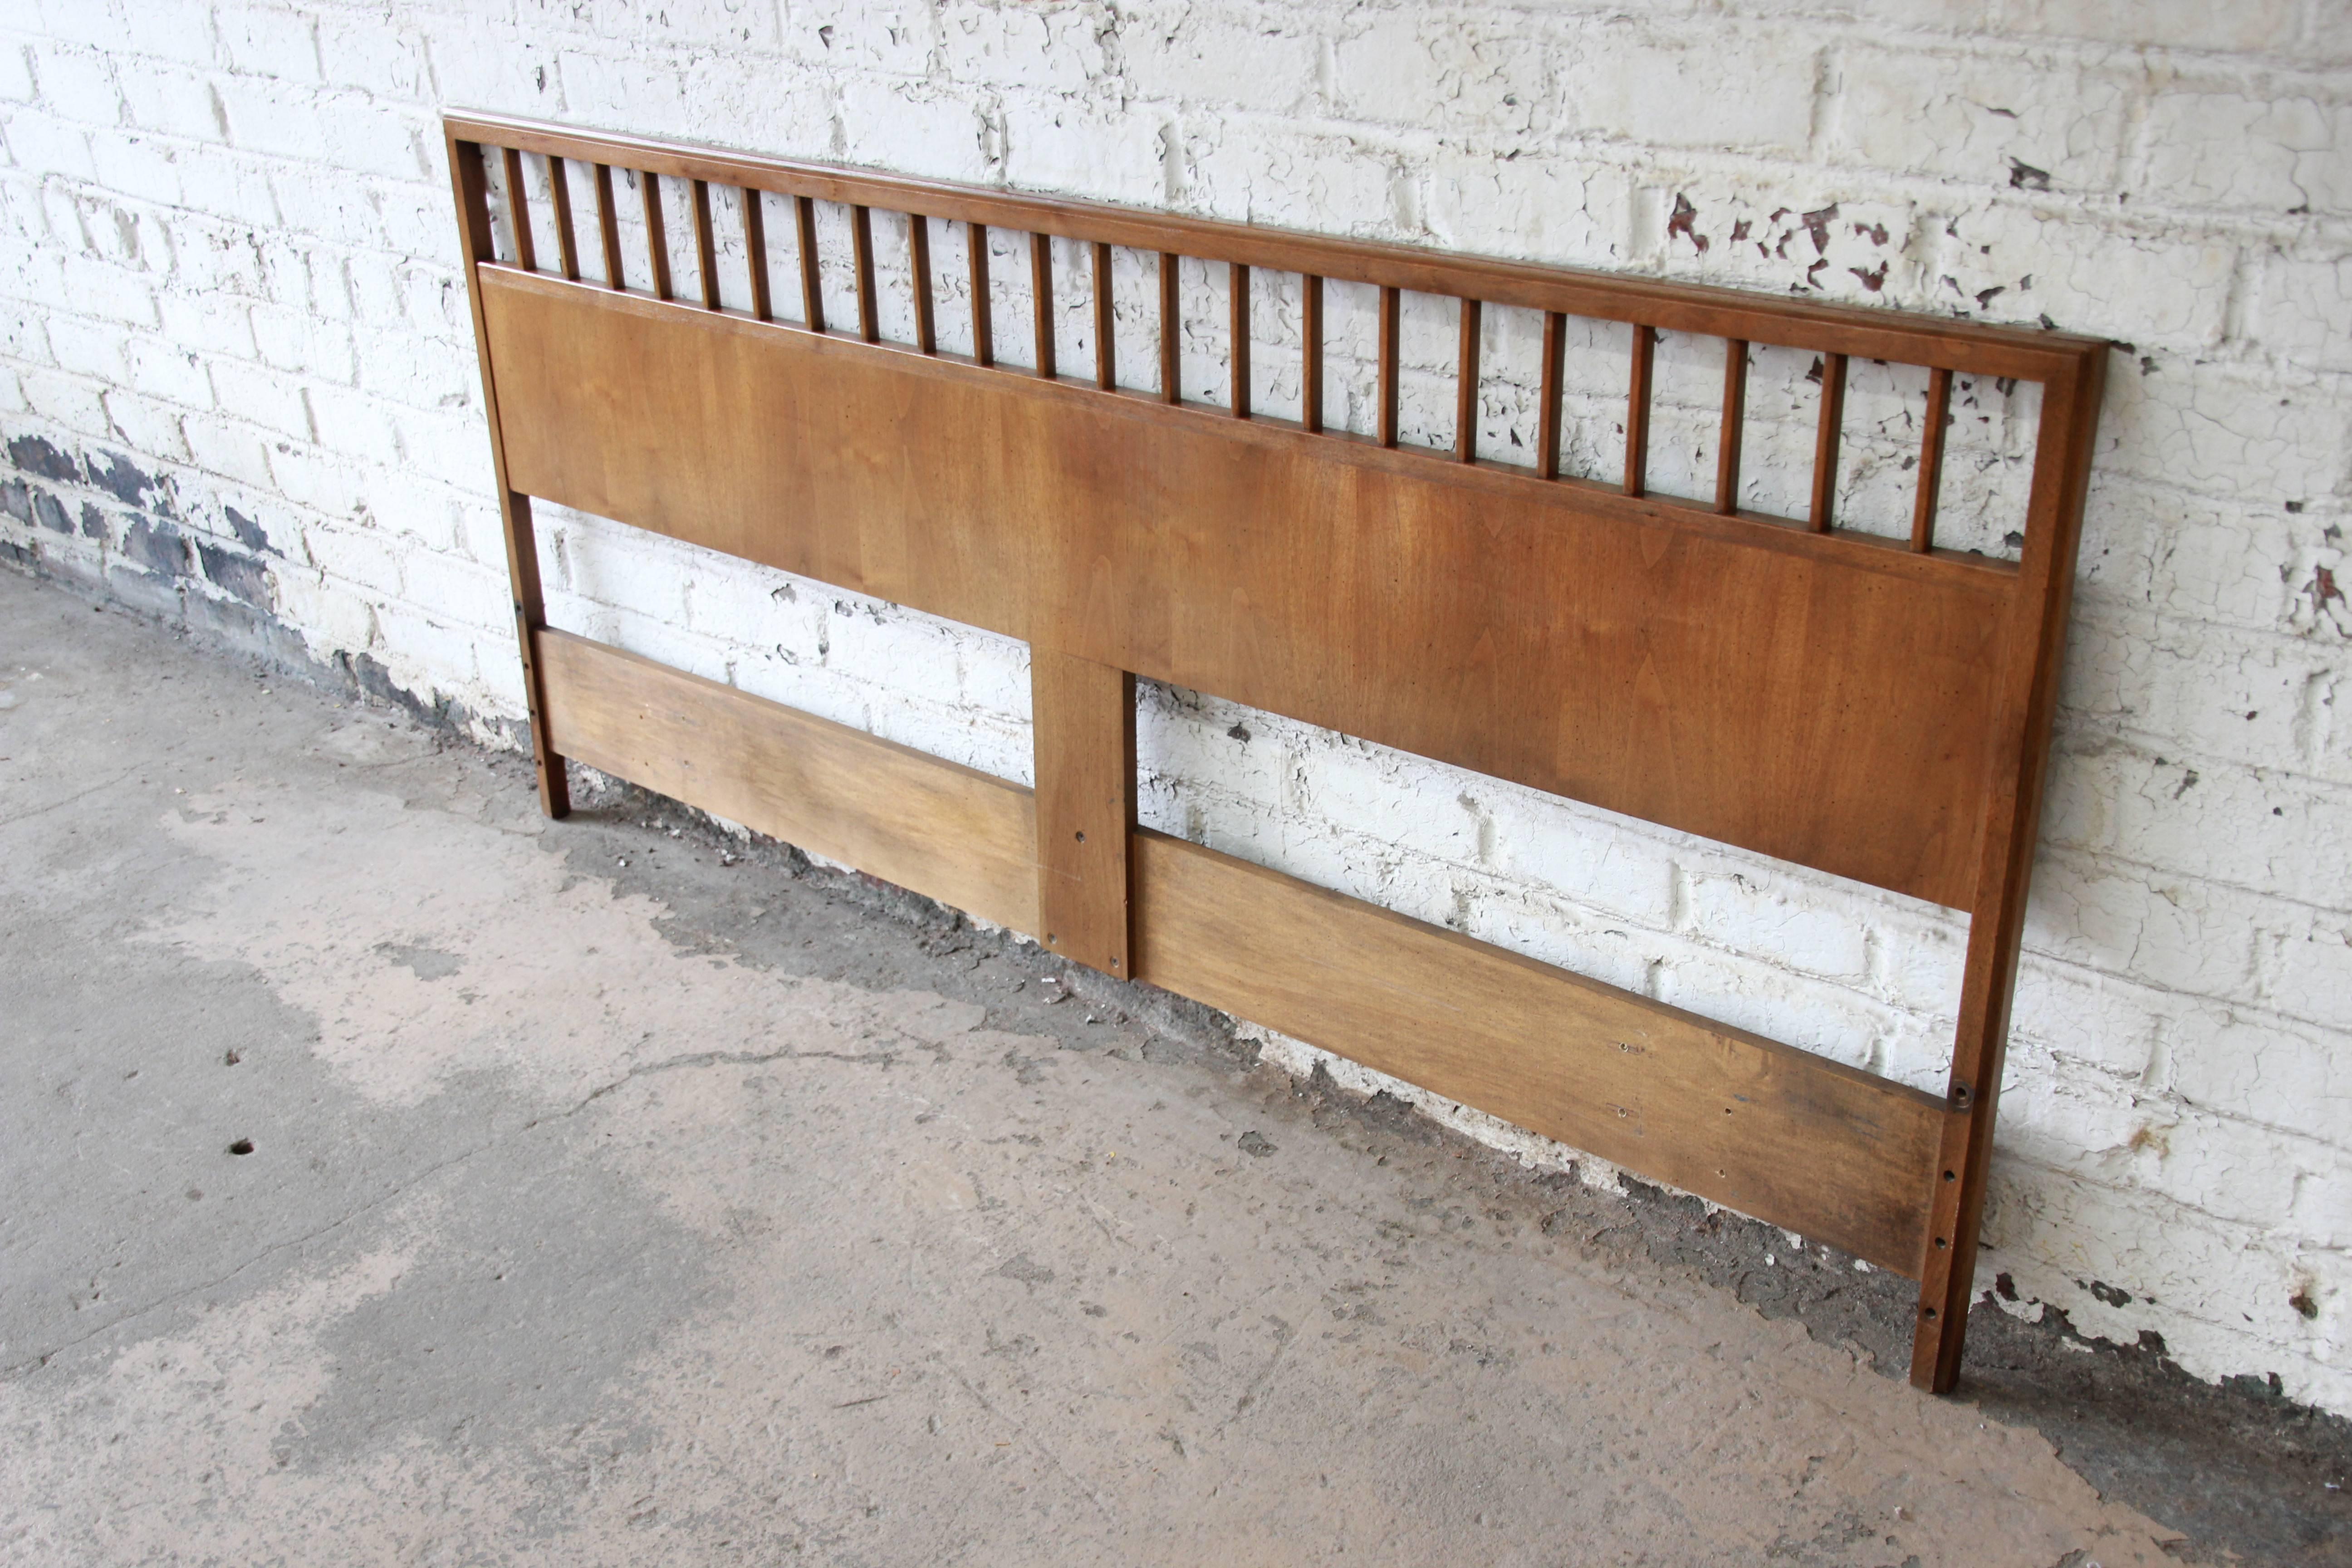 A beautiful Mid-Century Modern bleached walnut king-size headboard designed by Milo Baughman for Arch Gordon. The headboard features gorgeous wood grain and sleek midcentury design. It is in excellent original vintage condition.

 